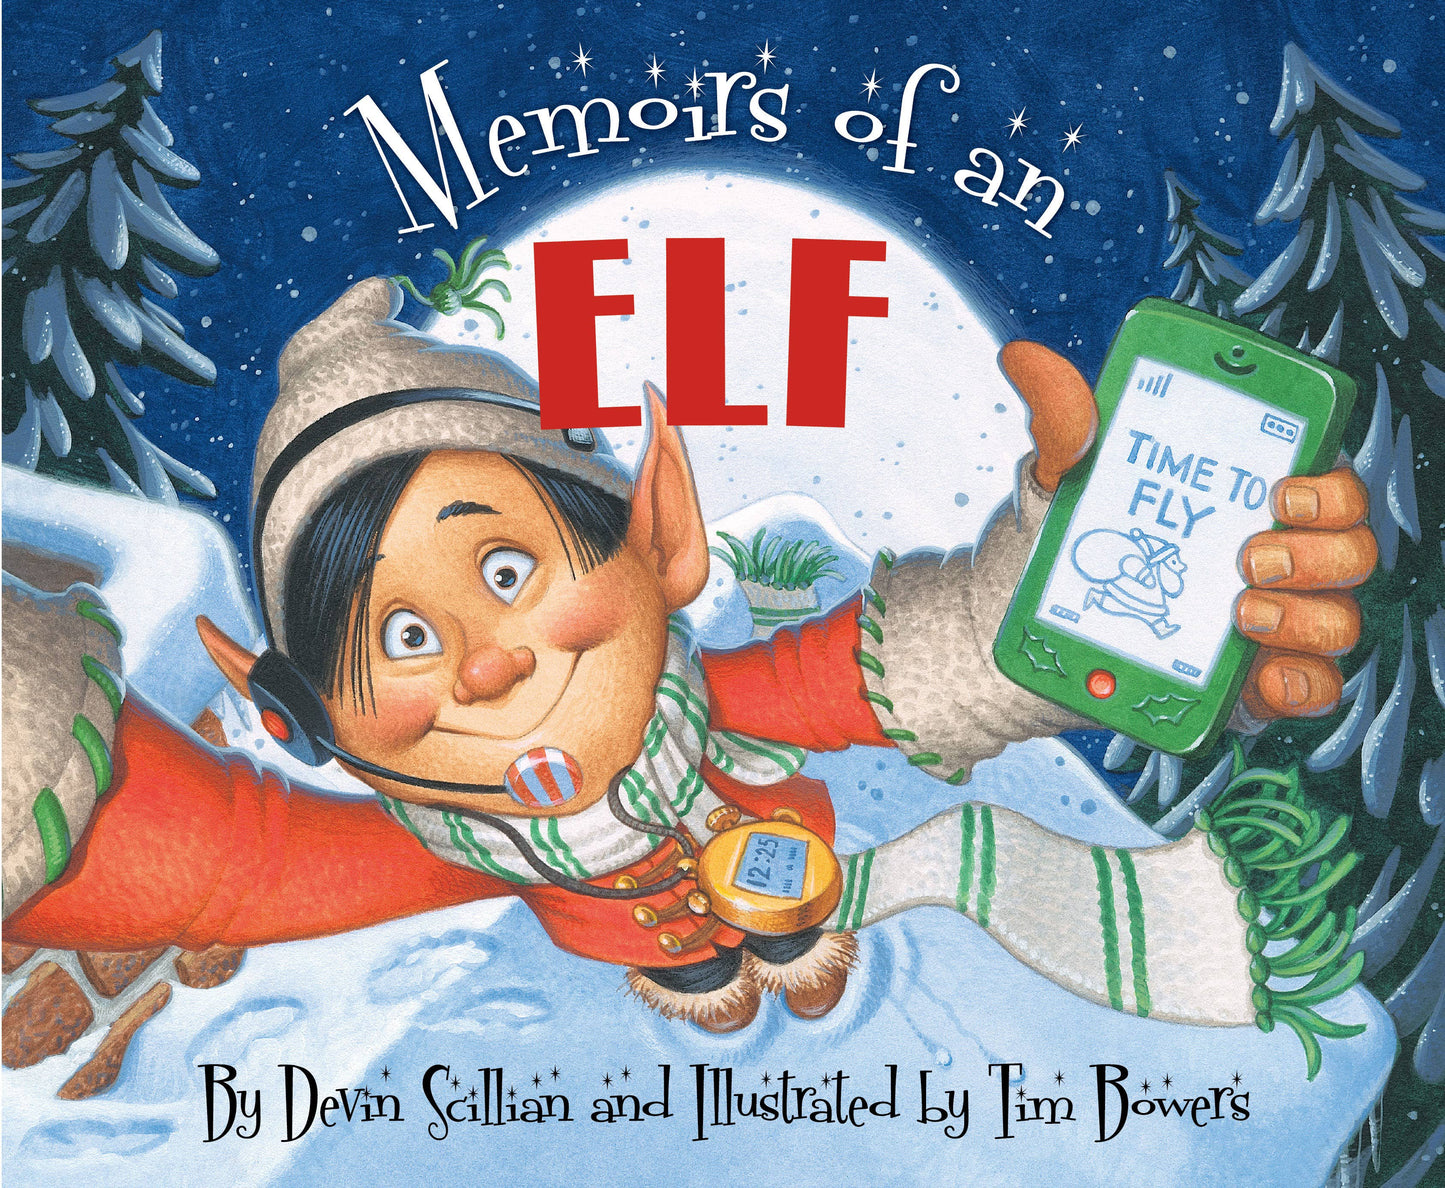 Memoirs of an Elf, a Christmas picture book